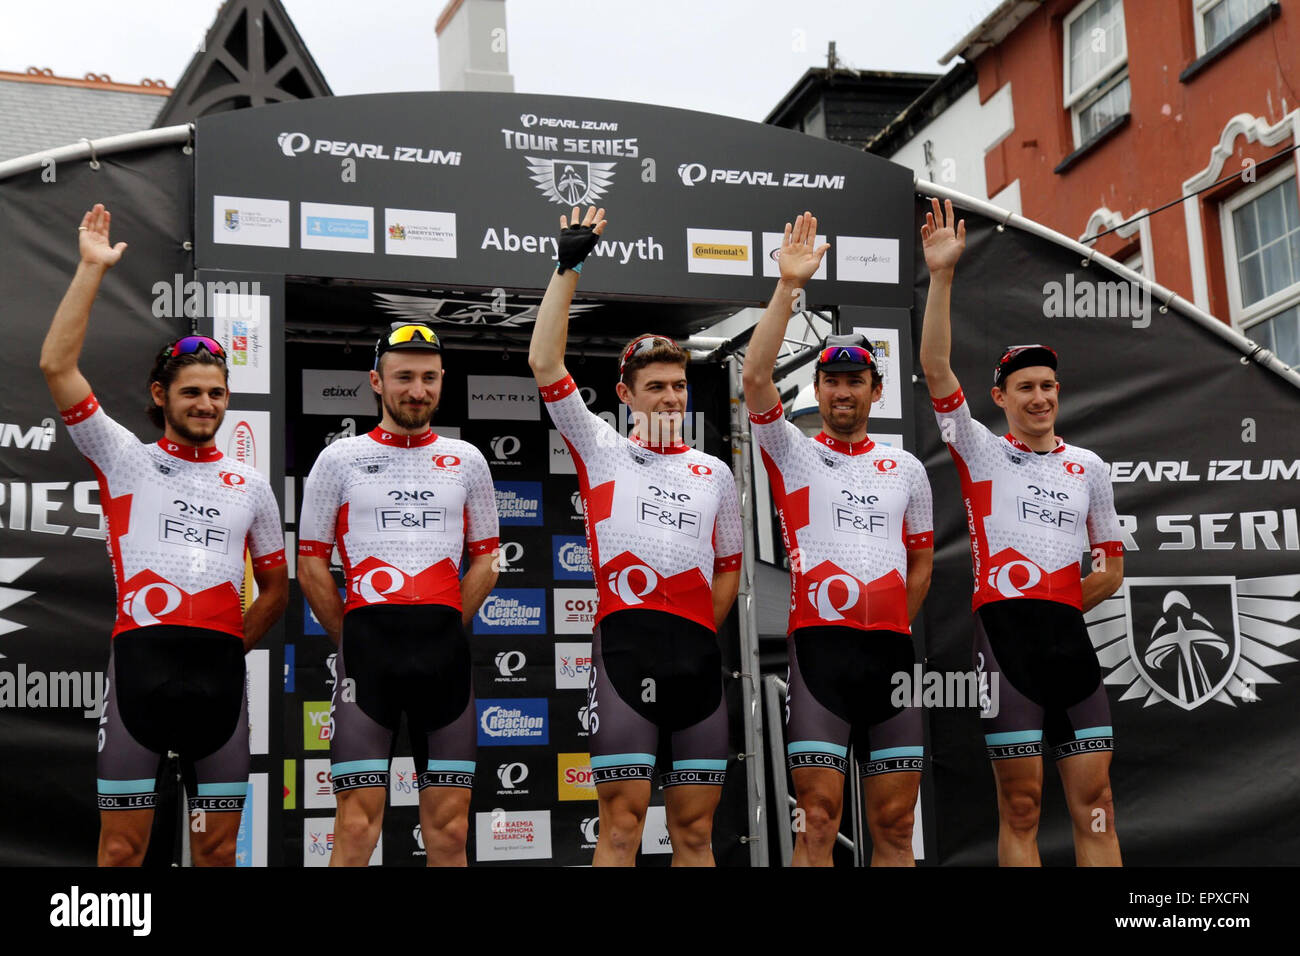 Aberystwyth, UK. 22nd May, 2015. Winner of the Hill Climb race in the Pearl Izumi Tour Series in Aberystwyth ONE Pro Cycling team. Credit:  Jon Freeman/Alamy Live News Stock Photo